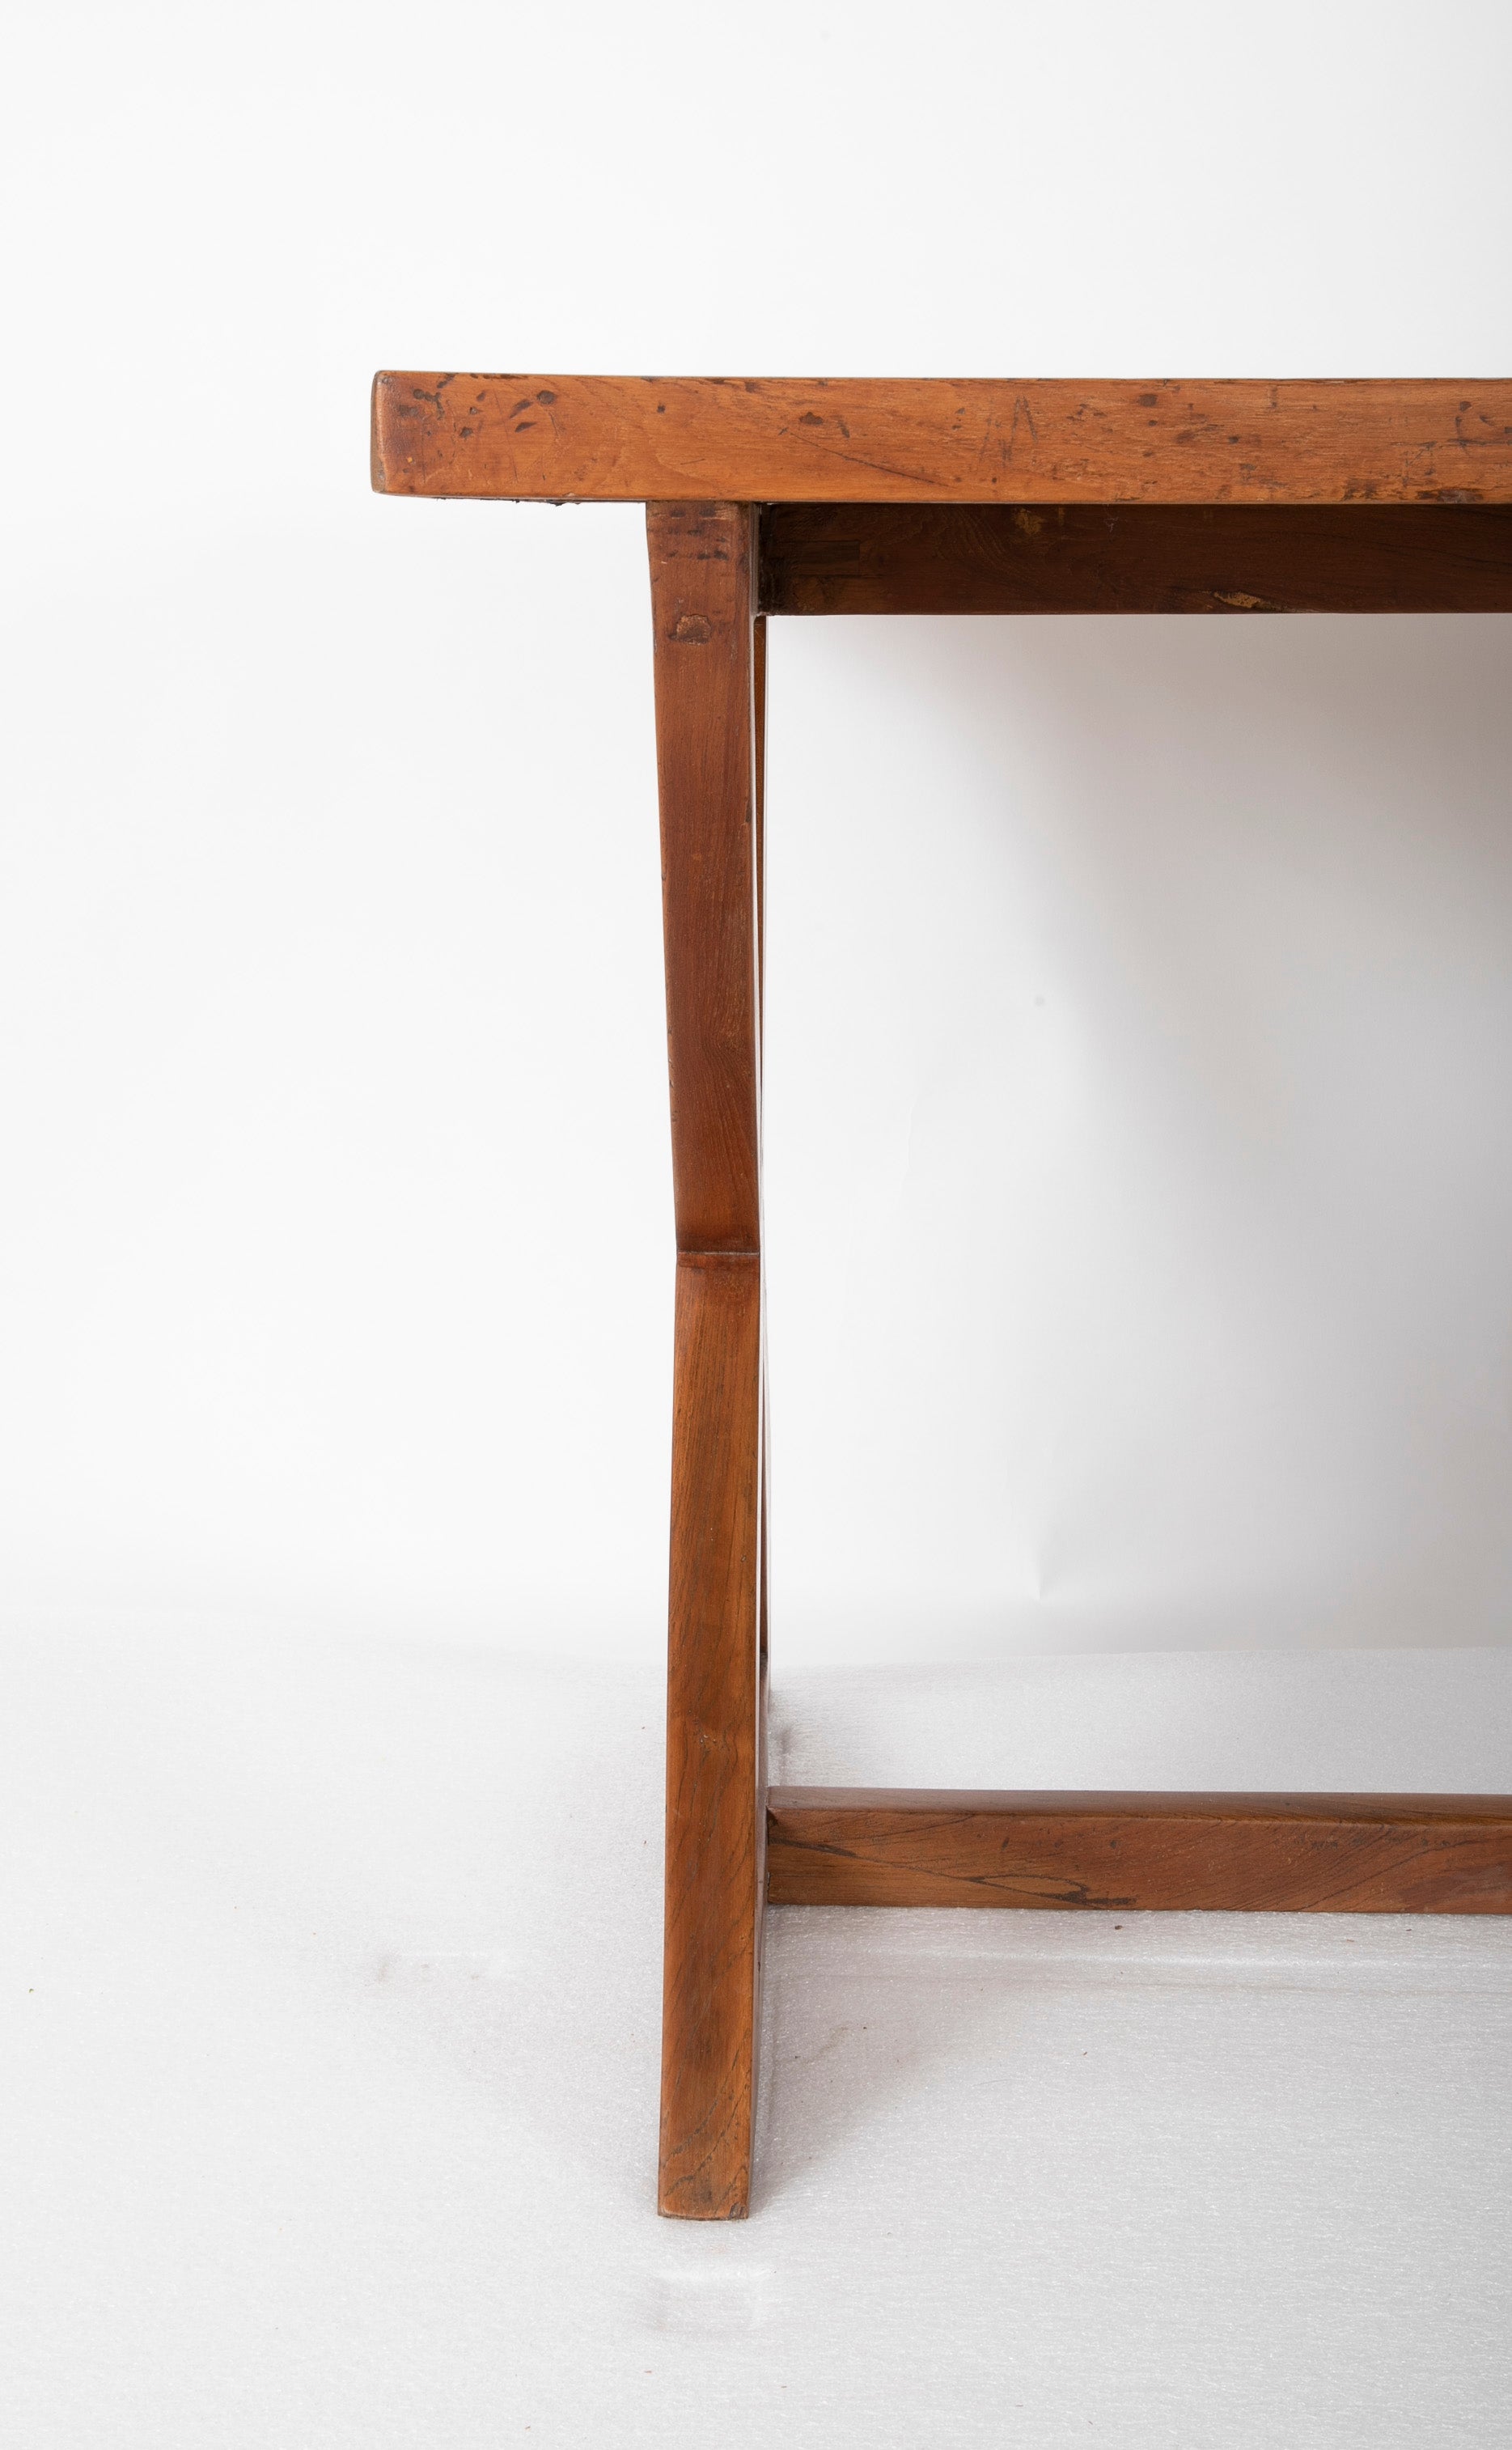 Original Pierre Jeanneret 'X' Leg Desk from the Offices of Chandigarh, India Designed by Le Corbusier